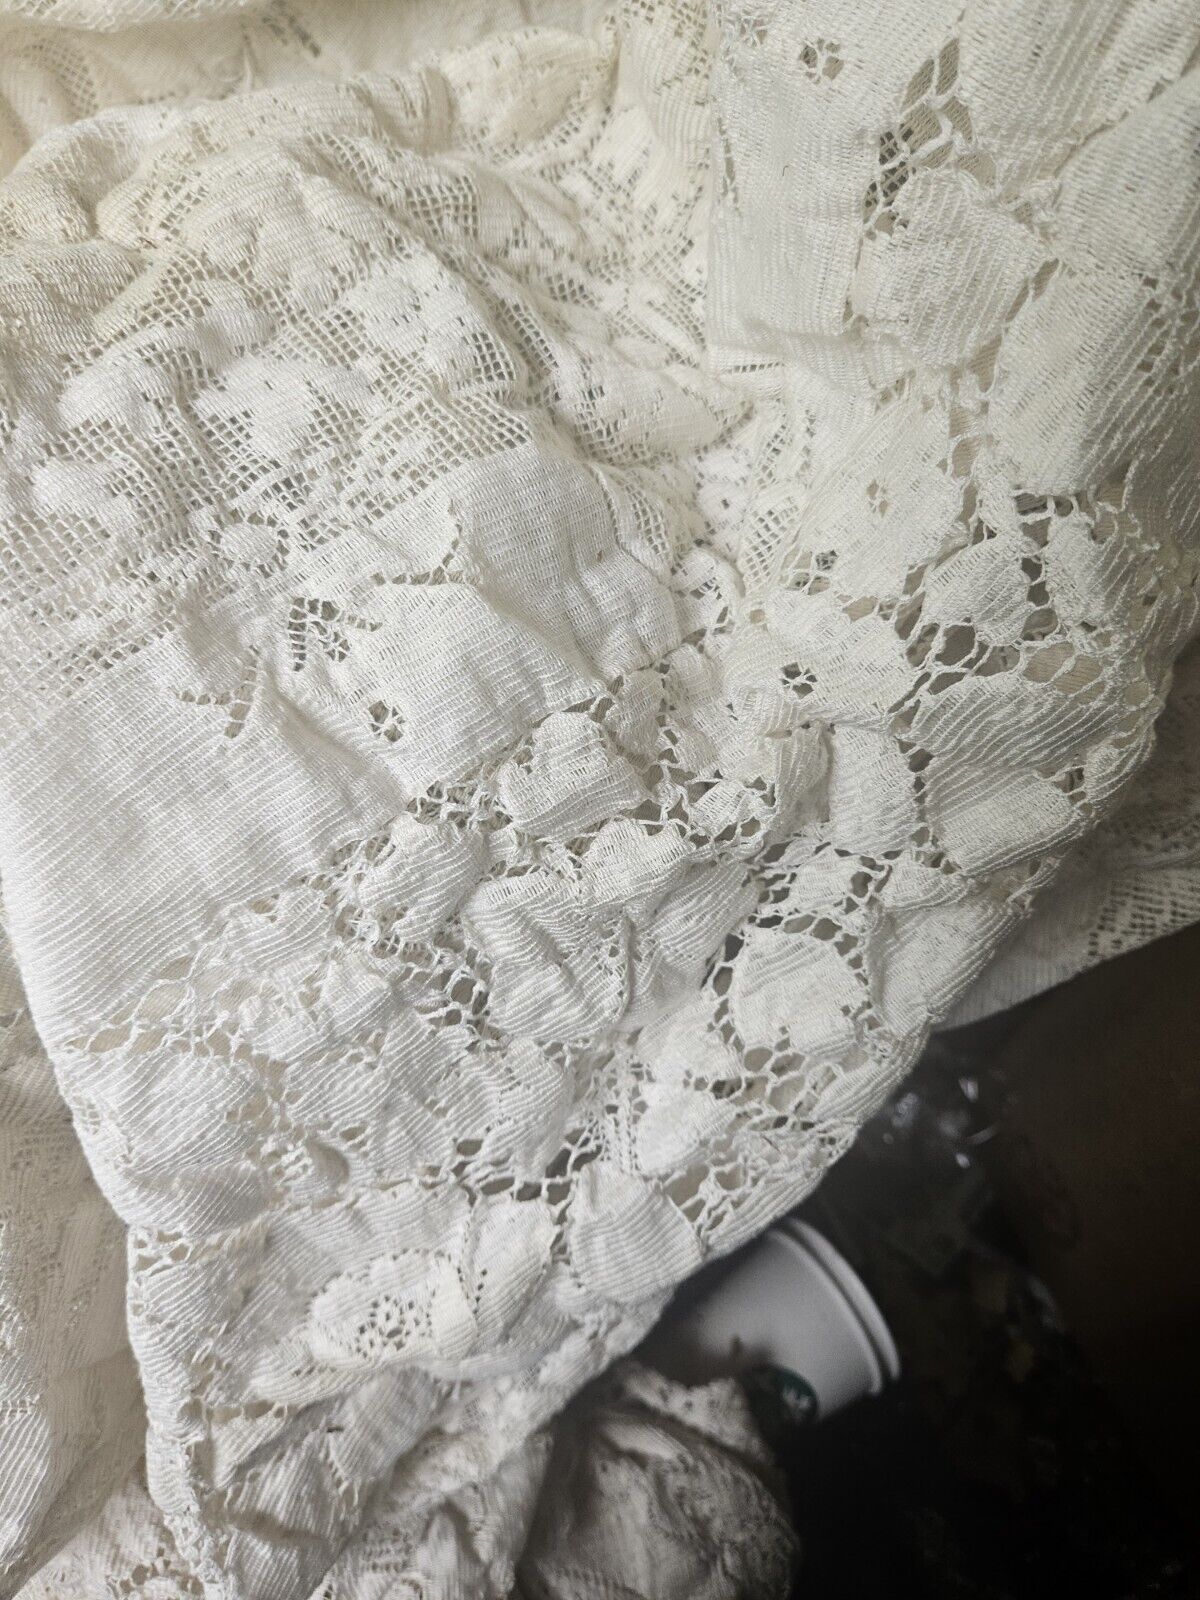 Old Vintage Lace In Original Crate 75 Pounds N.o.s.